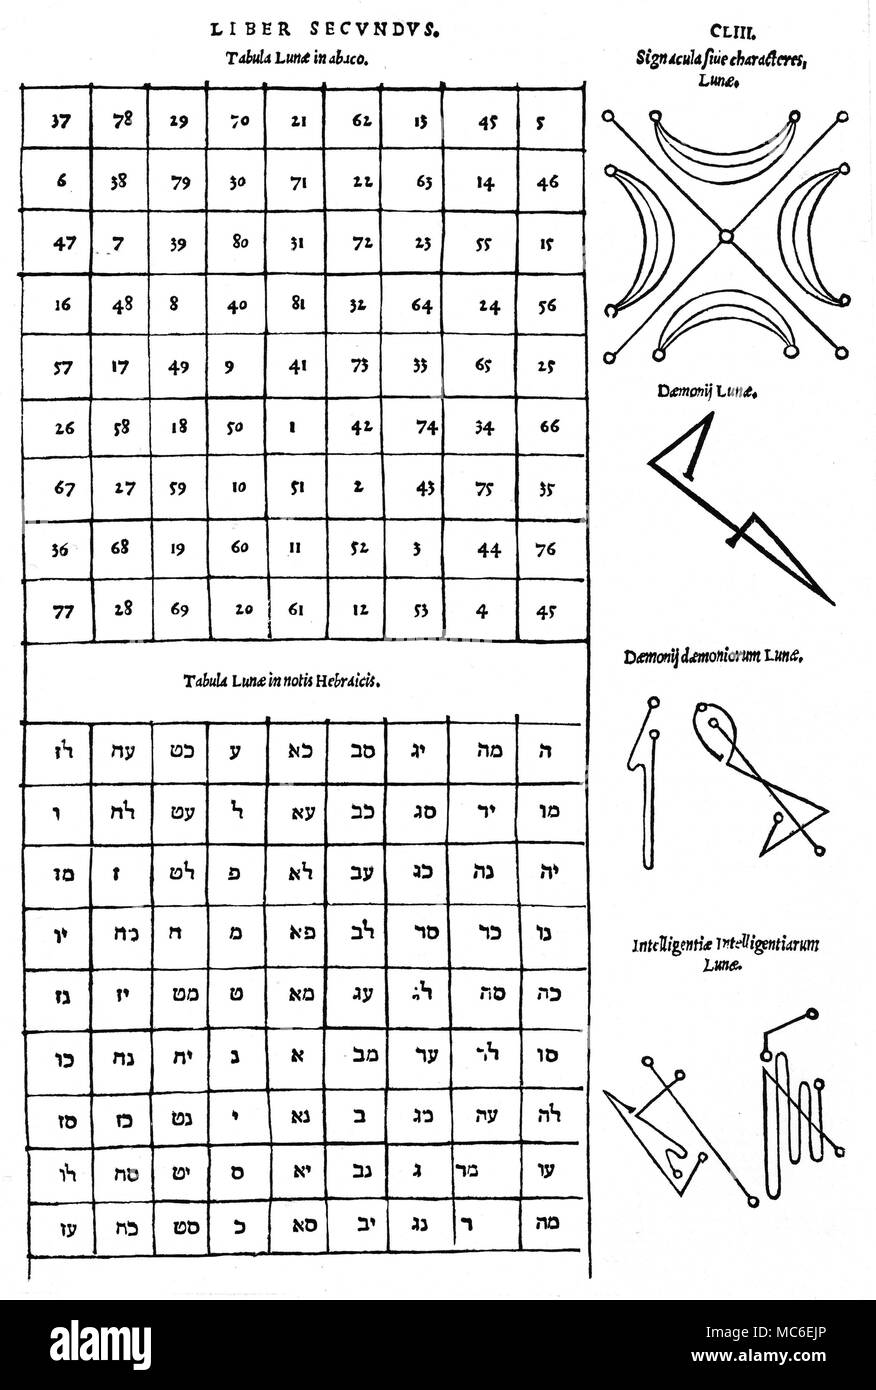 MAGIC SYMBOLS - MAGIC SQUARES - MOON The Tabula Lunae, or Magic Square of the Moon, based on a 9 x 9 square, the single linear addition of which is 369, in any direction. The square is surrounded by various names and sigils of angels and demons related to the Moon. The squares are given in both the Arabic numerals [top] and in the Hebraic [bottom]. Alongside are the sigils for the planet, the Intelligentiae of the Moon, and the Demon (these sigils are derived from numerological tracings of the Magic Square). From Cornelius Agrippa, De Occulta Philosophia, 1533 edition. Stock Photo